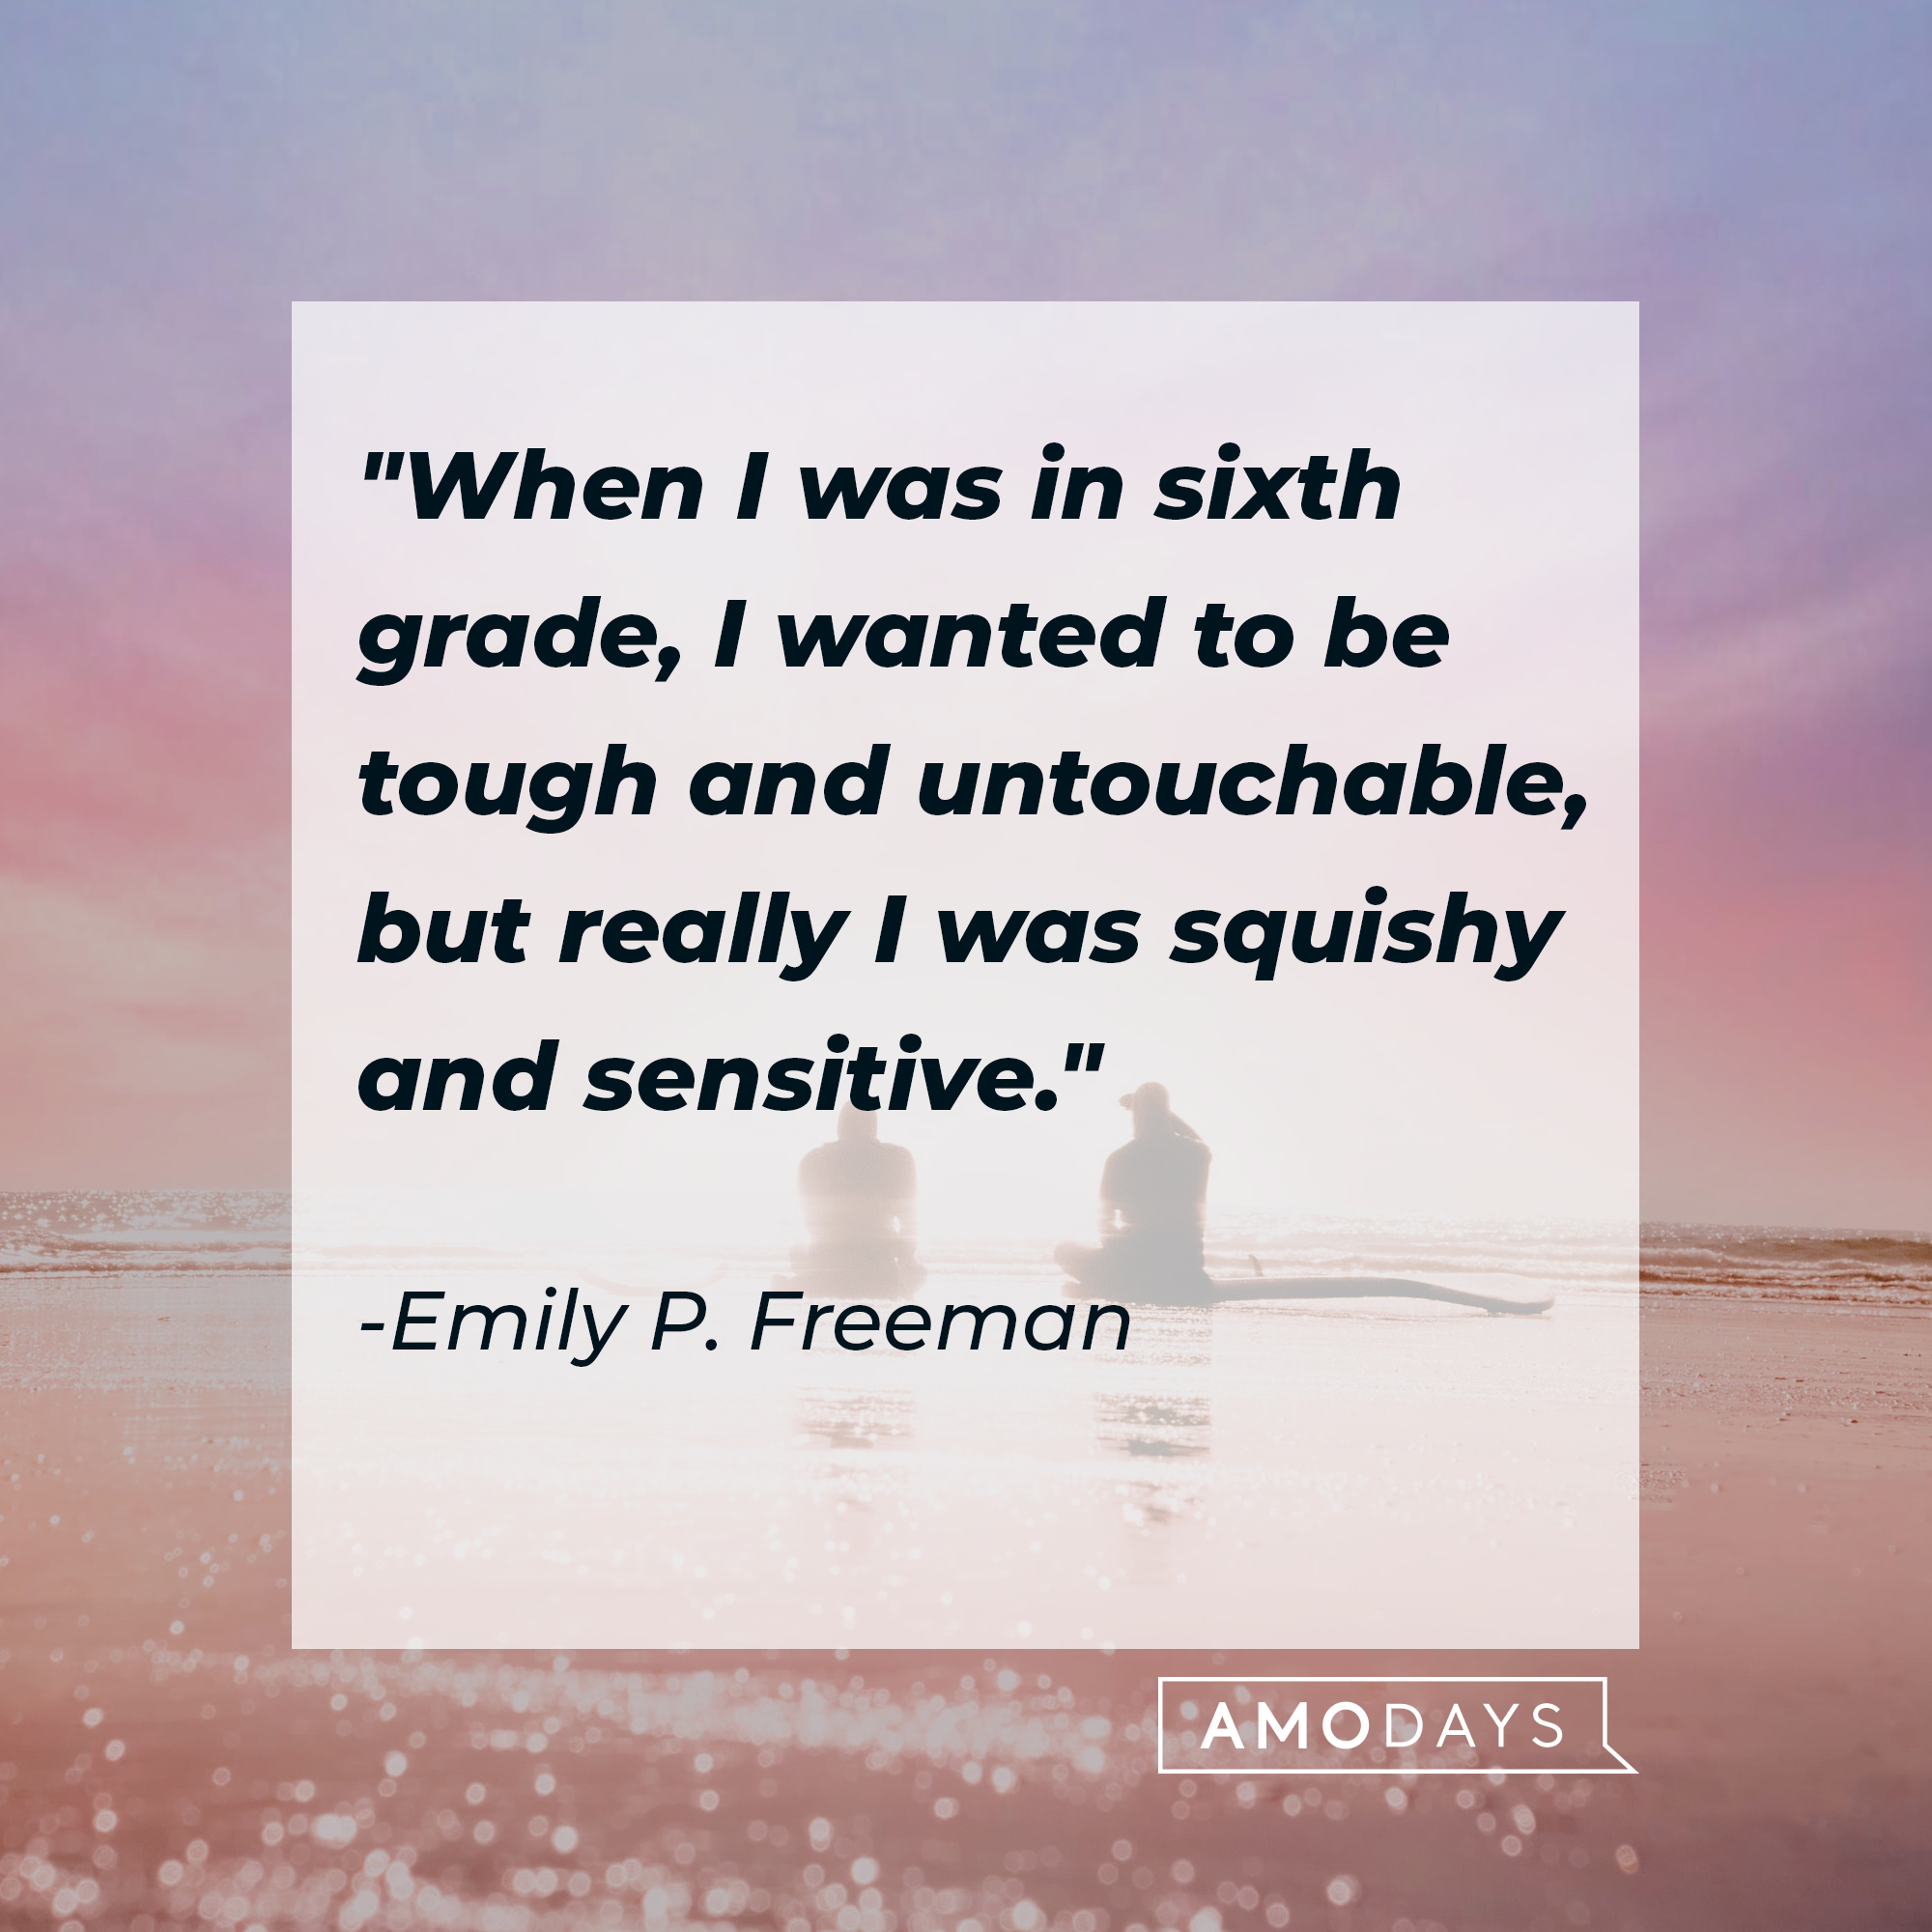 Emily P. Freeman's quote: "When I was in sixth grade, I wanted to be tough and untouchable, but really I was squishy and sensitive." | Source: Unsplash